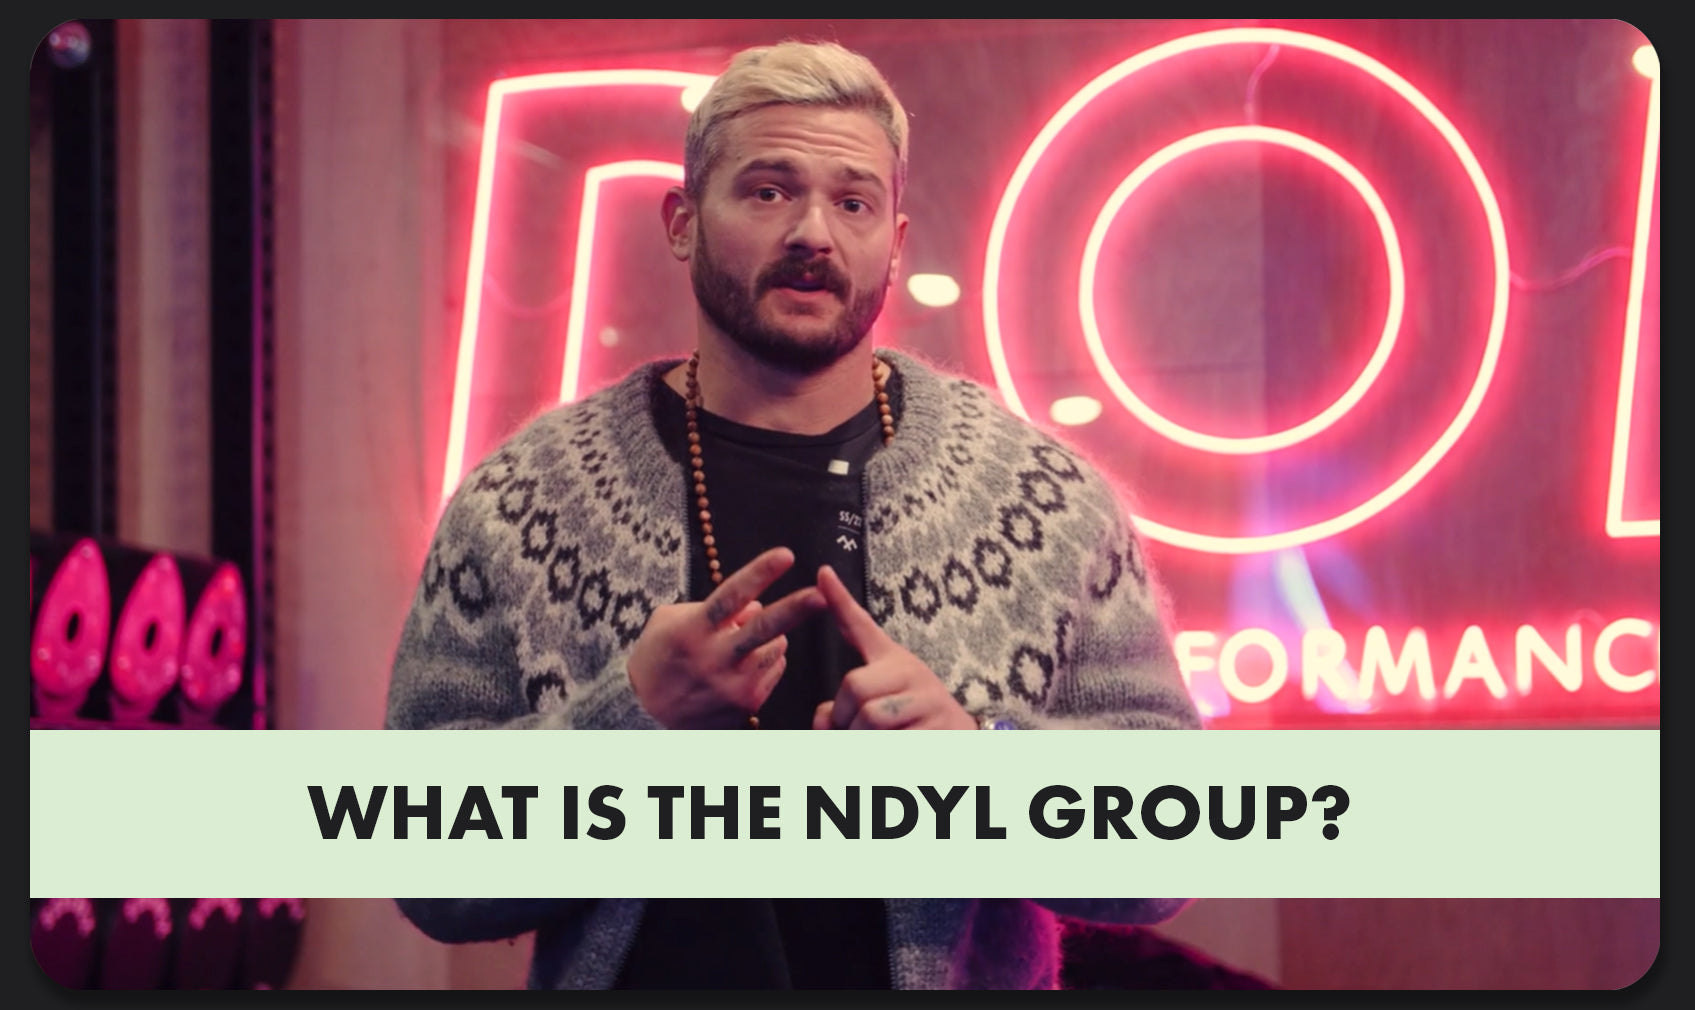 Load video: A video of Matt explaining what the NDYL membership and group entails